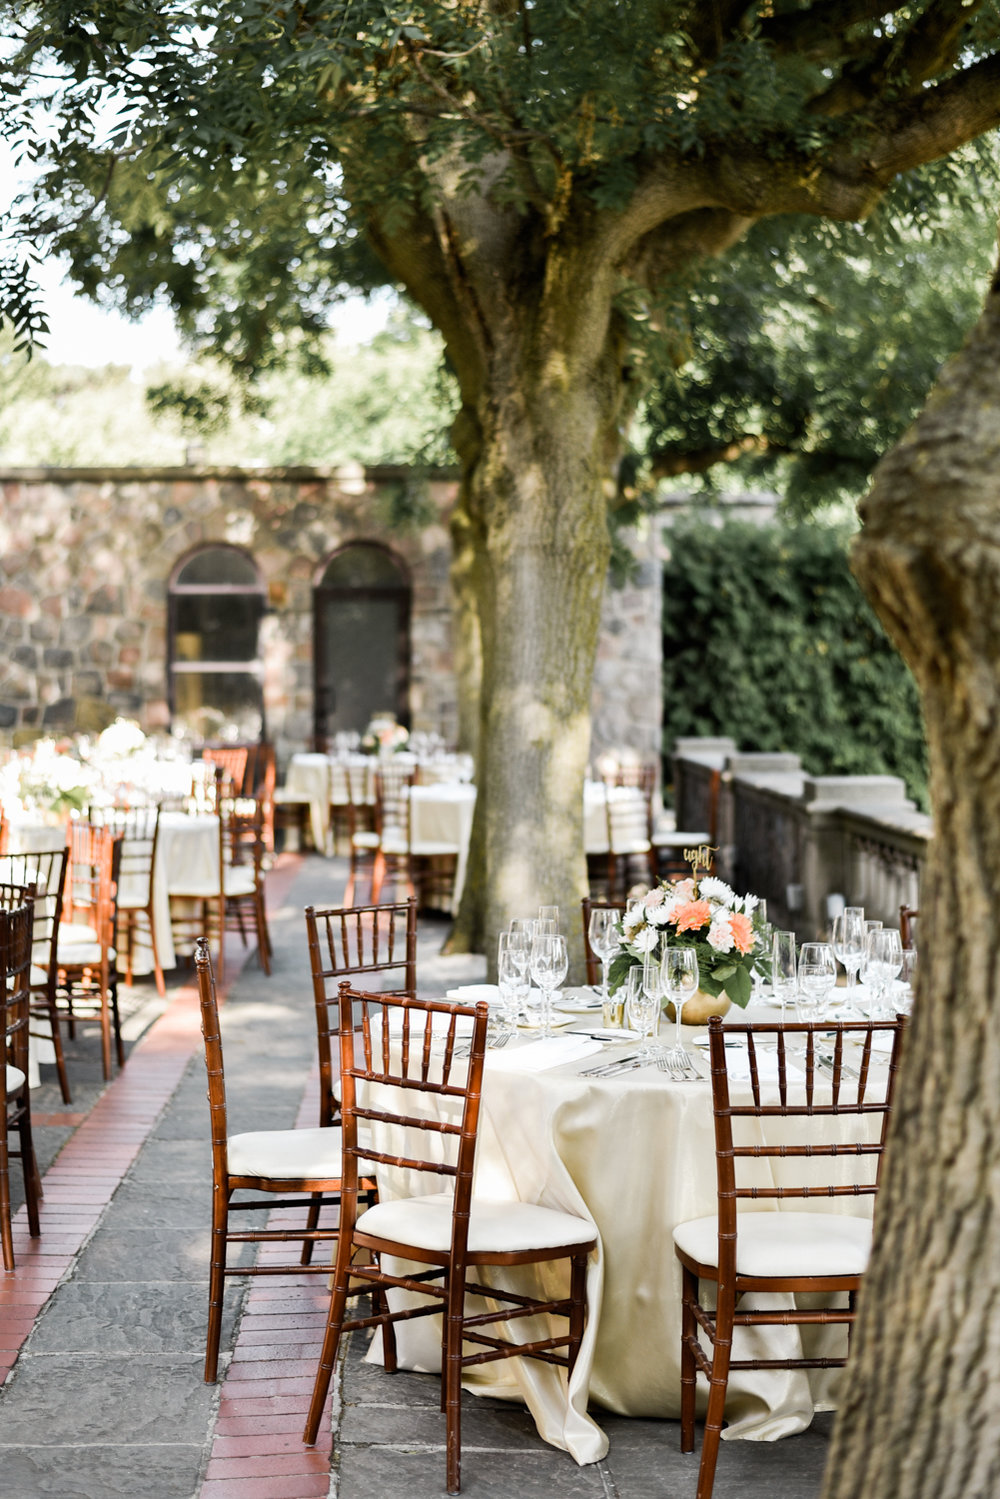 The most gorgeous outdoor tablescape at graydon hall wedding in between the trees